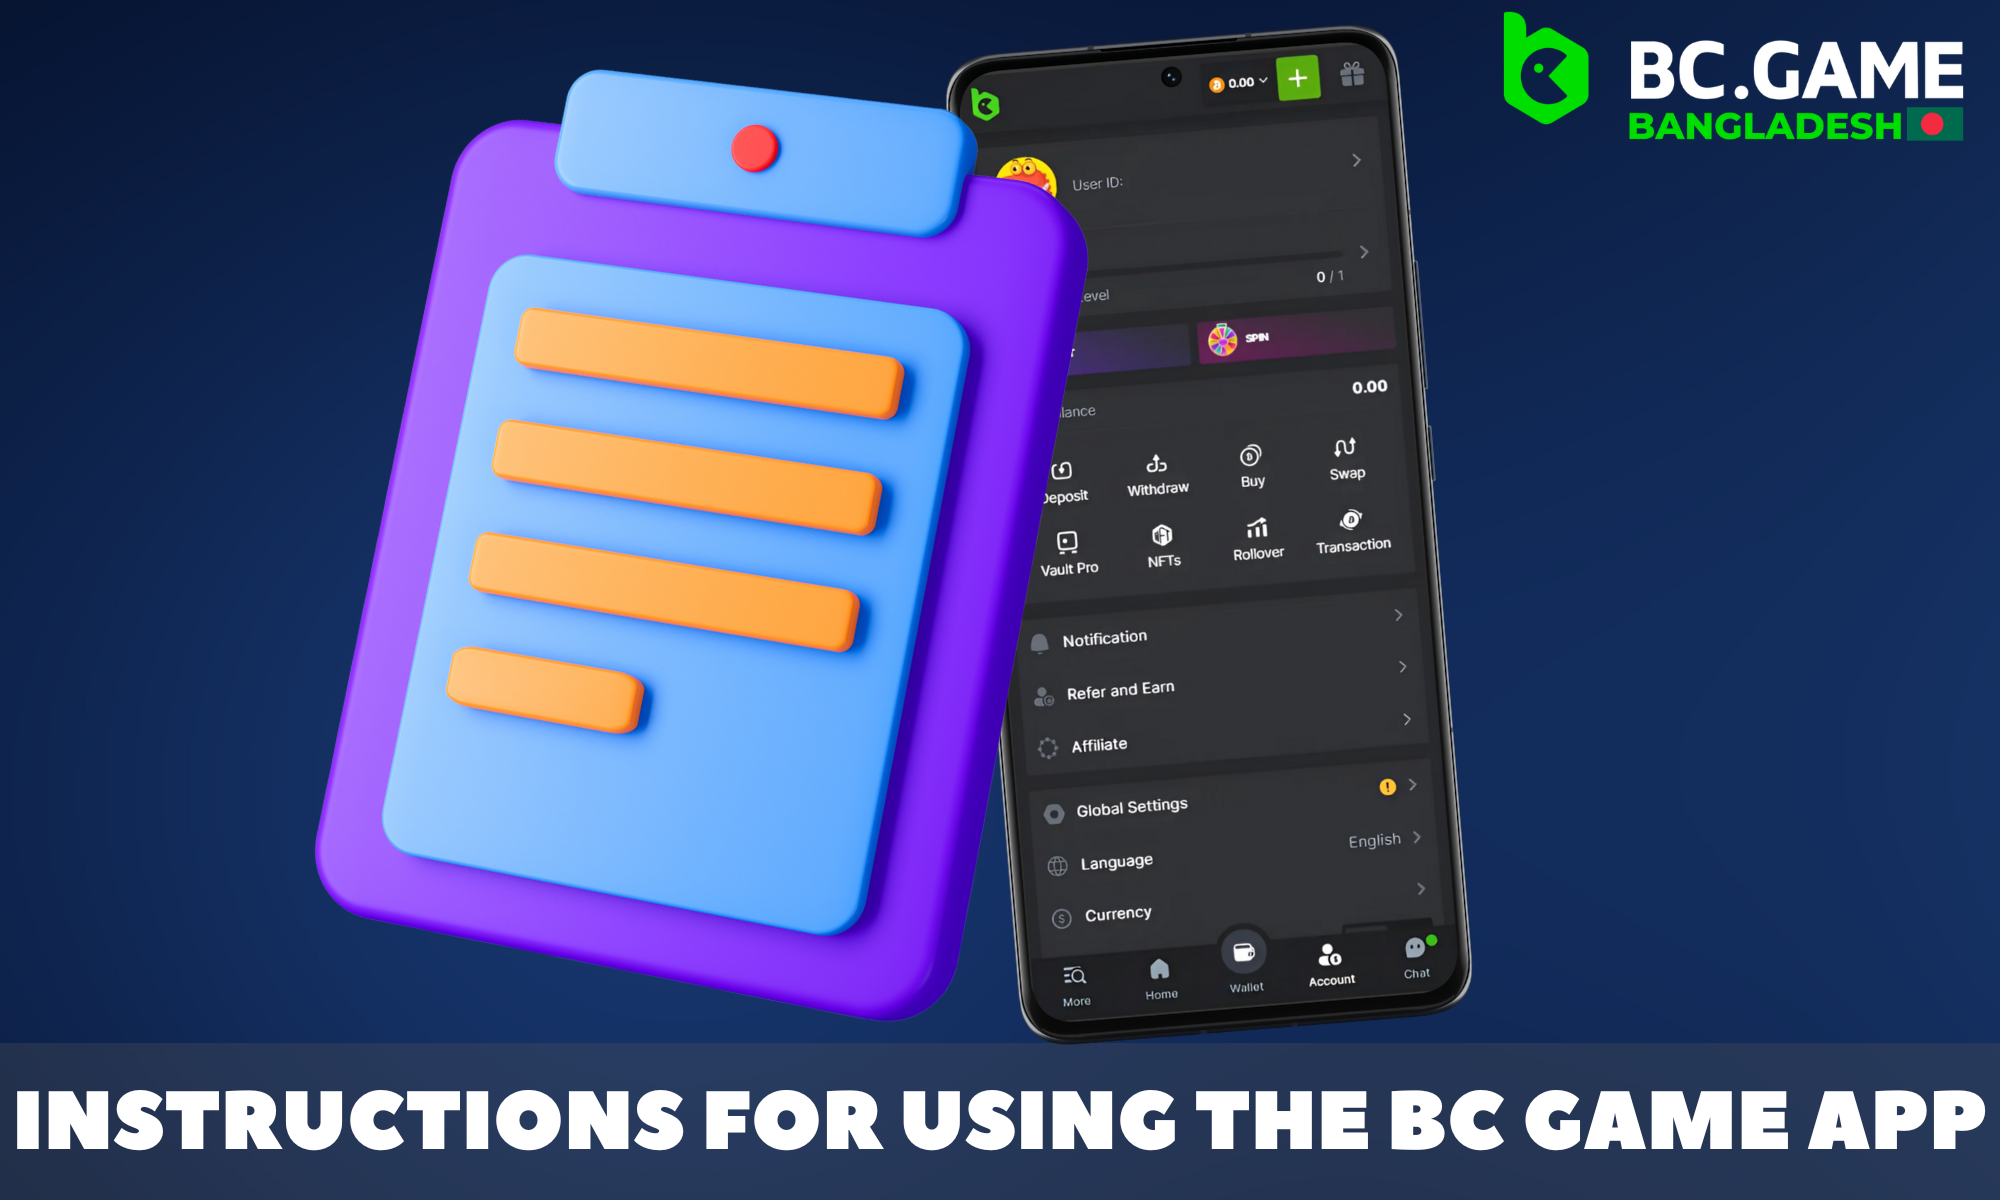 Detailed instructions for using the BC Game app